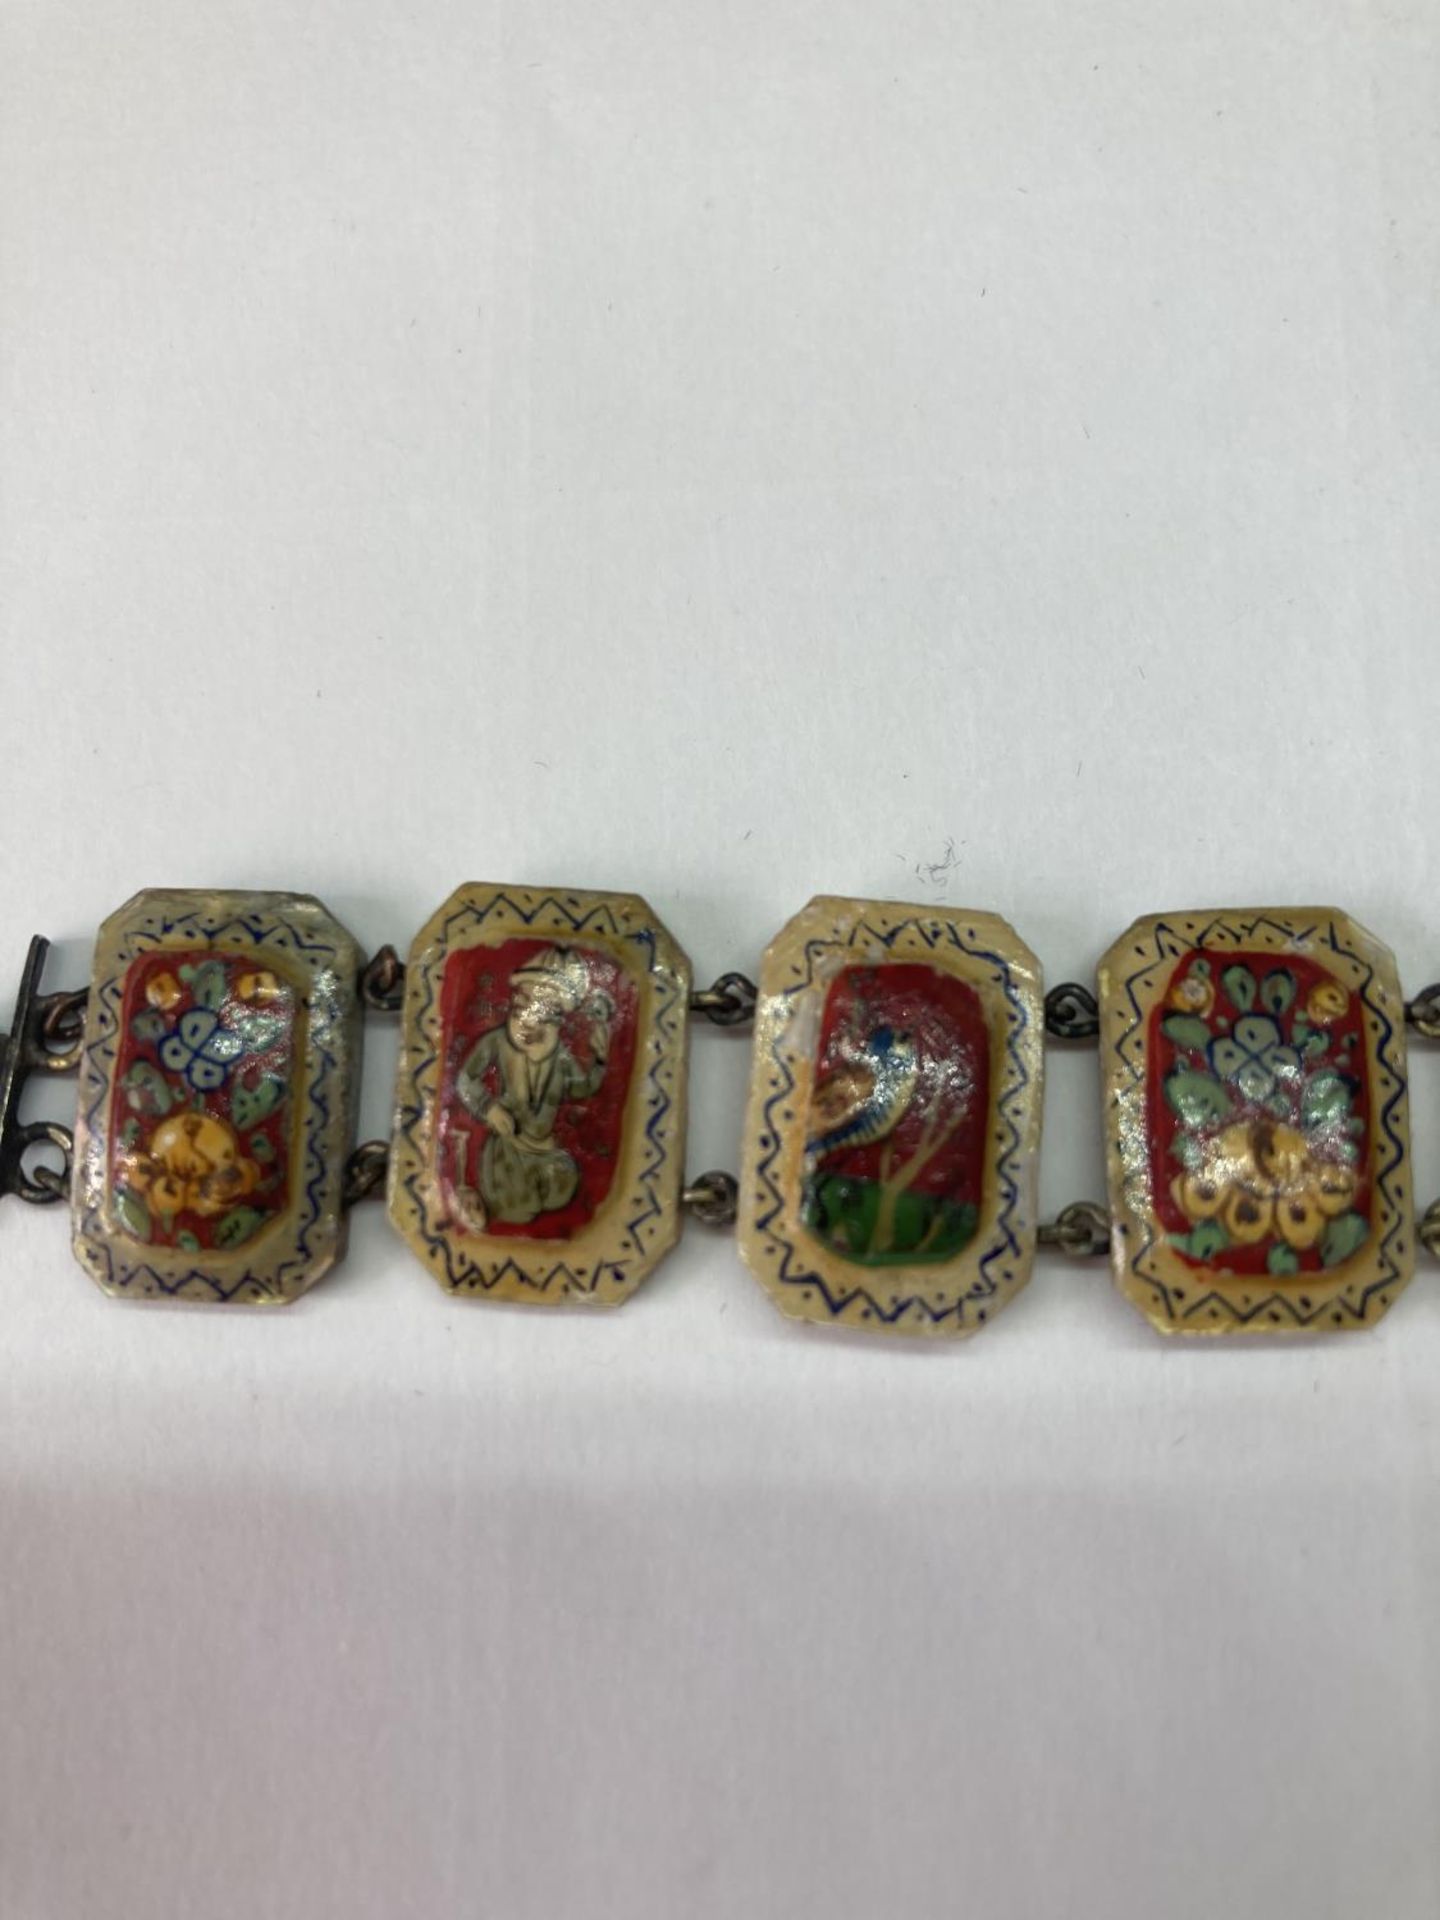 A DECORATIVE HAND PAINTED PERSIAN MOTHER OF PEARL BRACELET IN A PRESENTATION BOX - Image 5 of 12